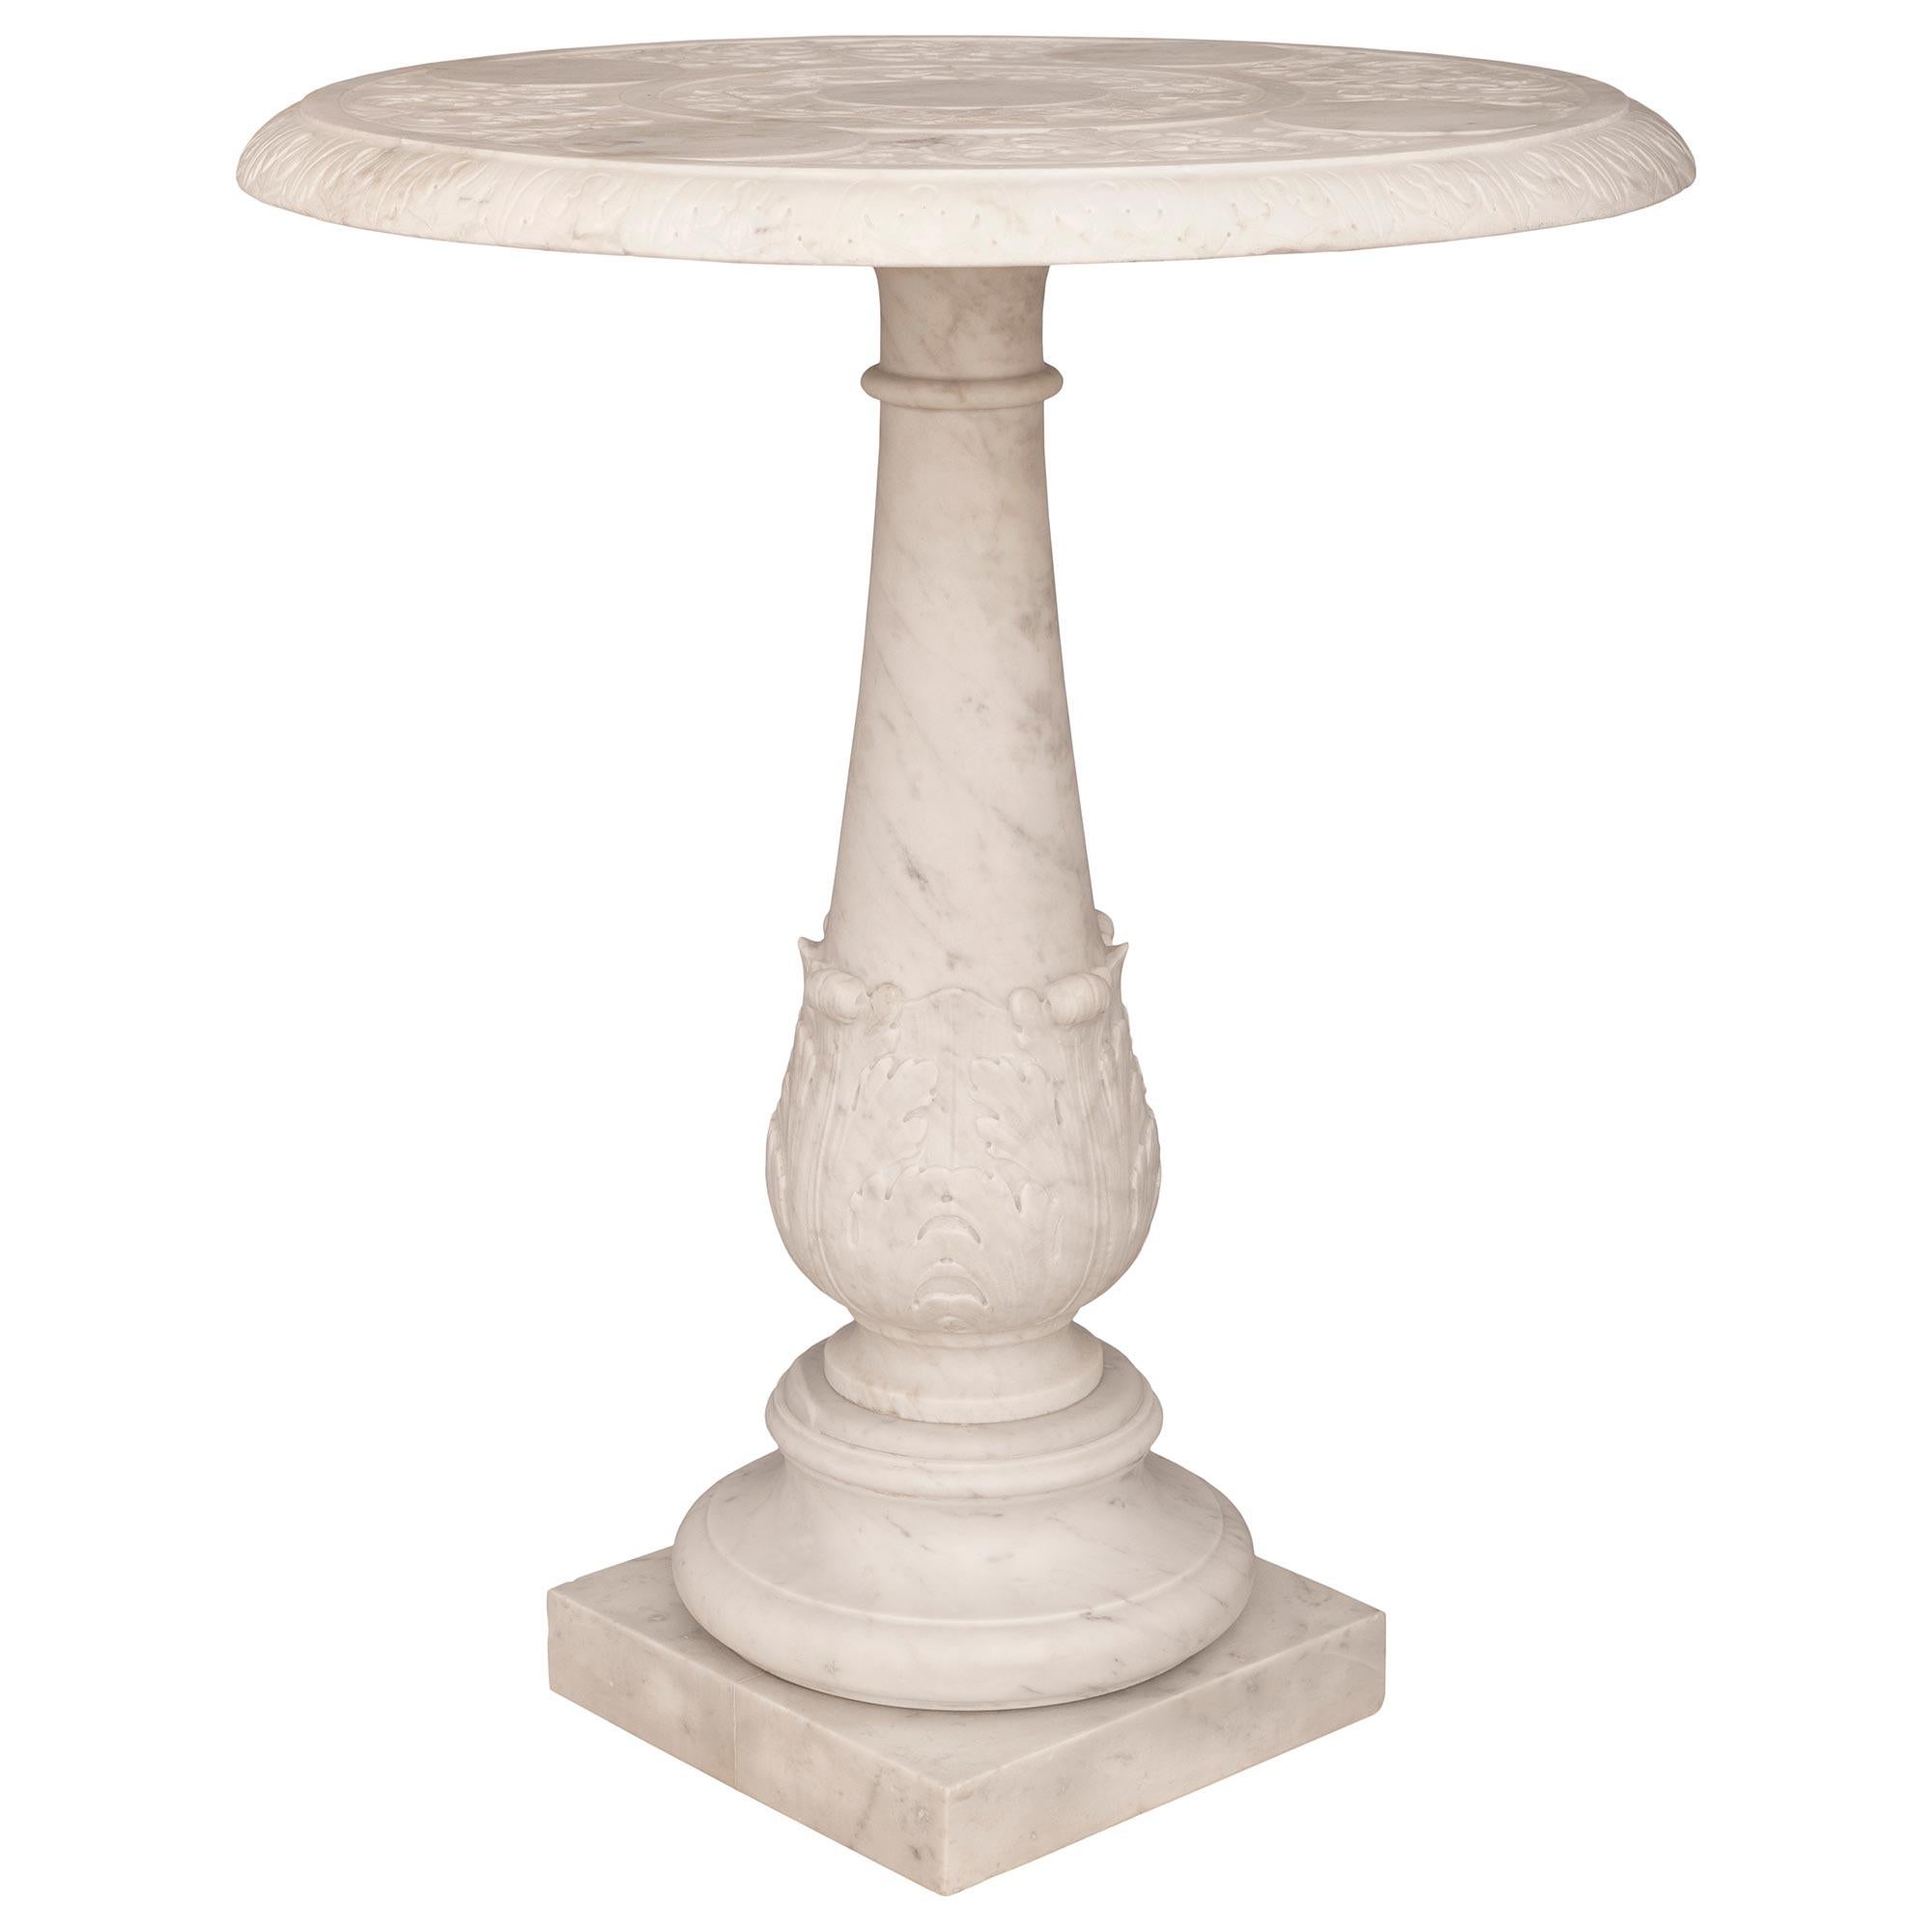 Italian 19th Century Louis XVI St. Solid White Carrara Marble Side Table In Good Condition For Sale In West Palm Beach, FL